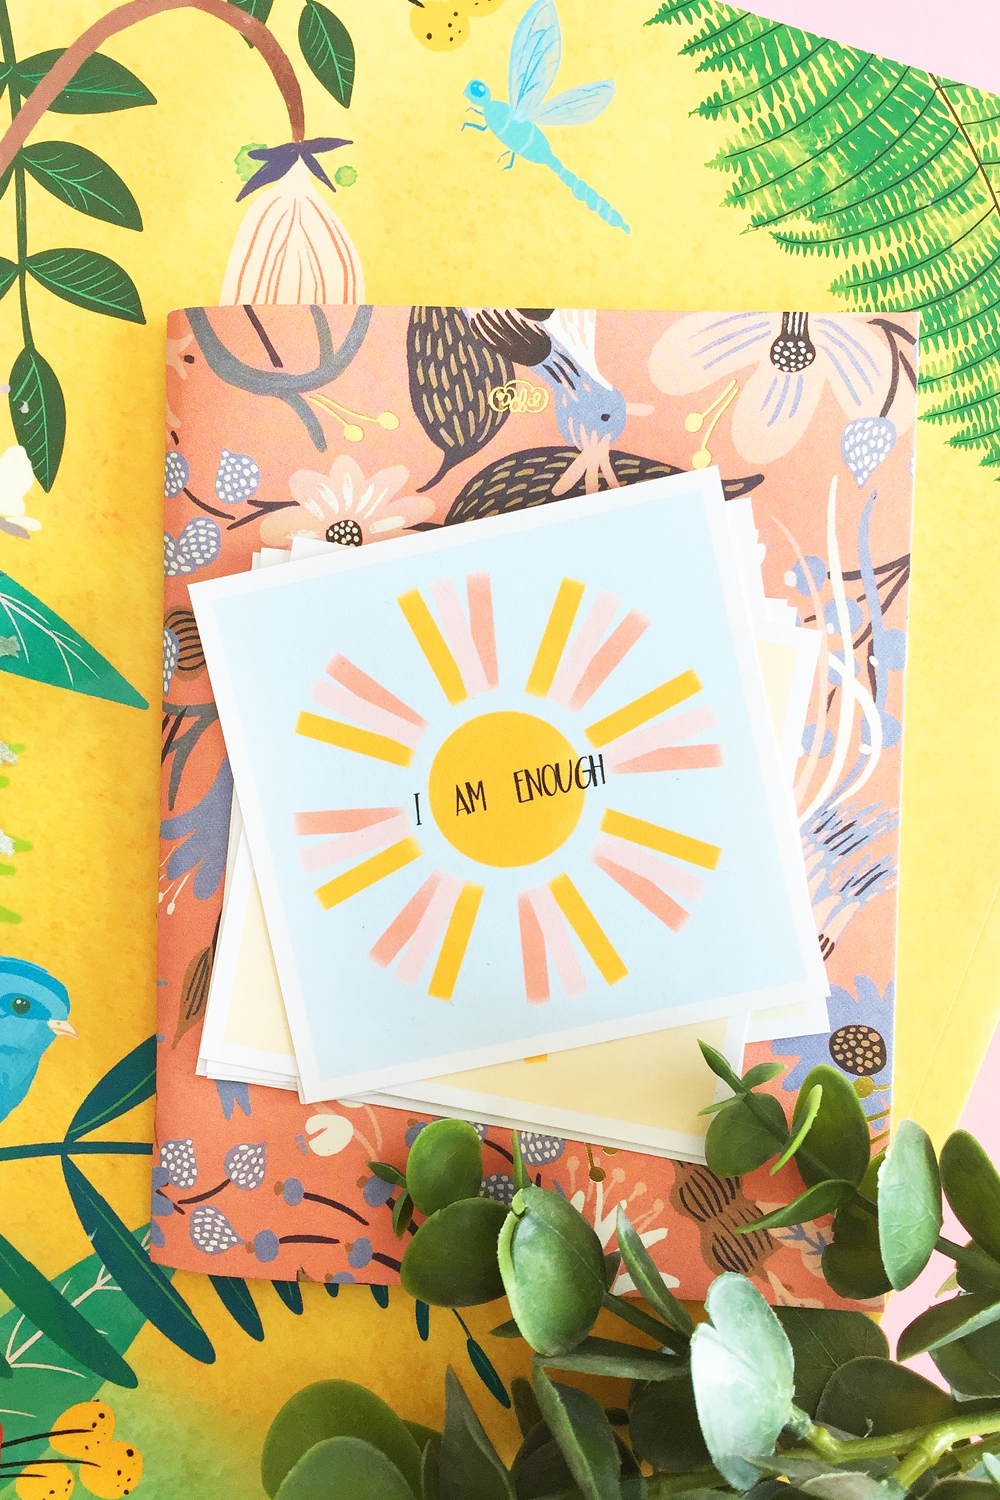 DIY Affirmation Cards - This tutorial shows you how to make your own printable affirmation cards with a free download!